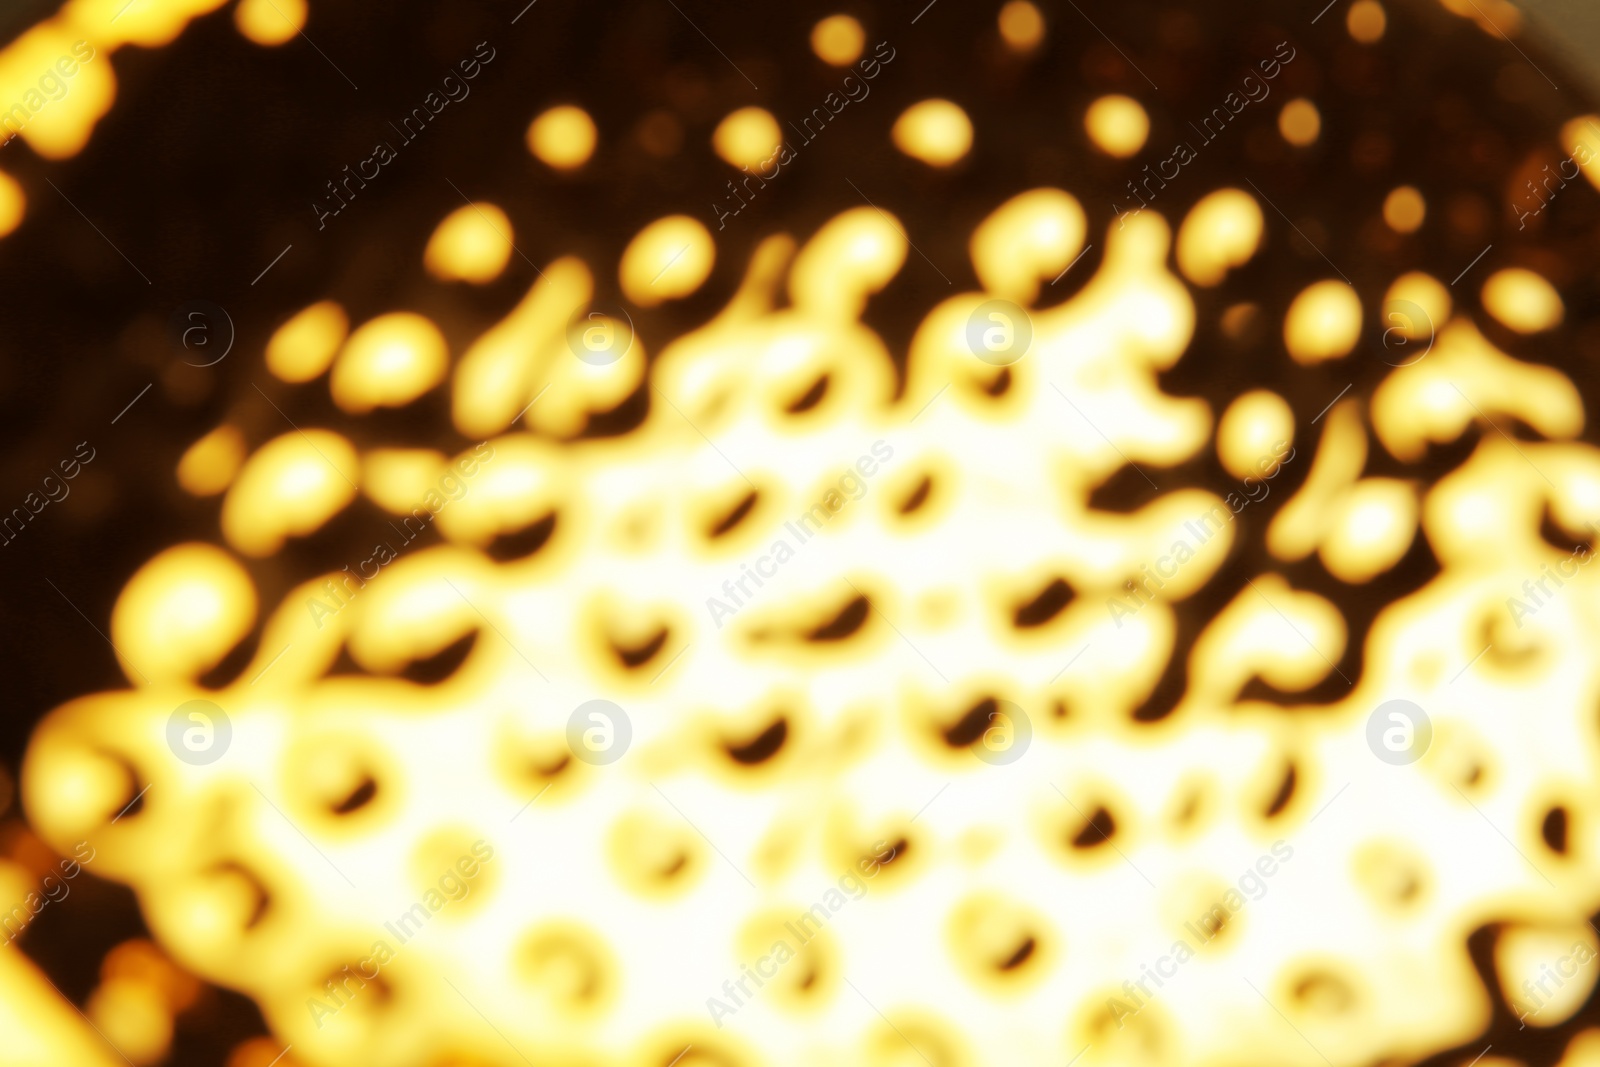 Photo of Blurred view of shiny golden surface as background